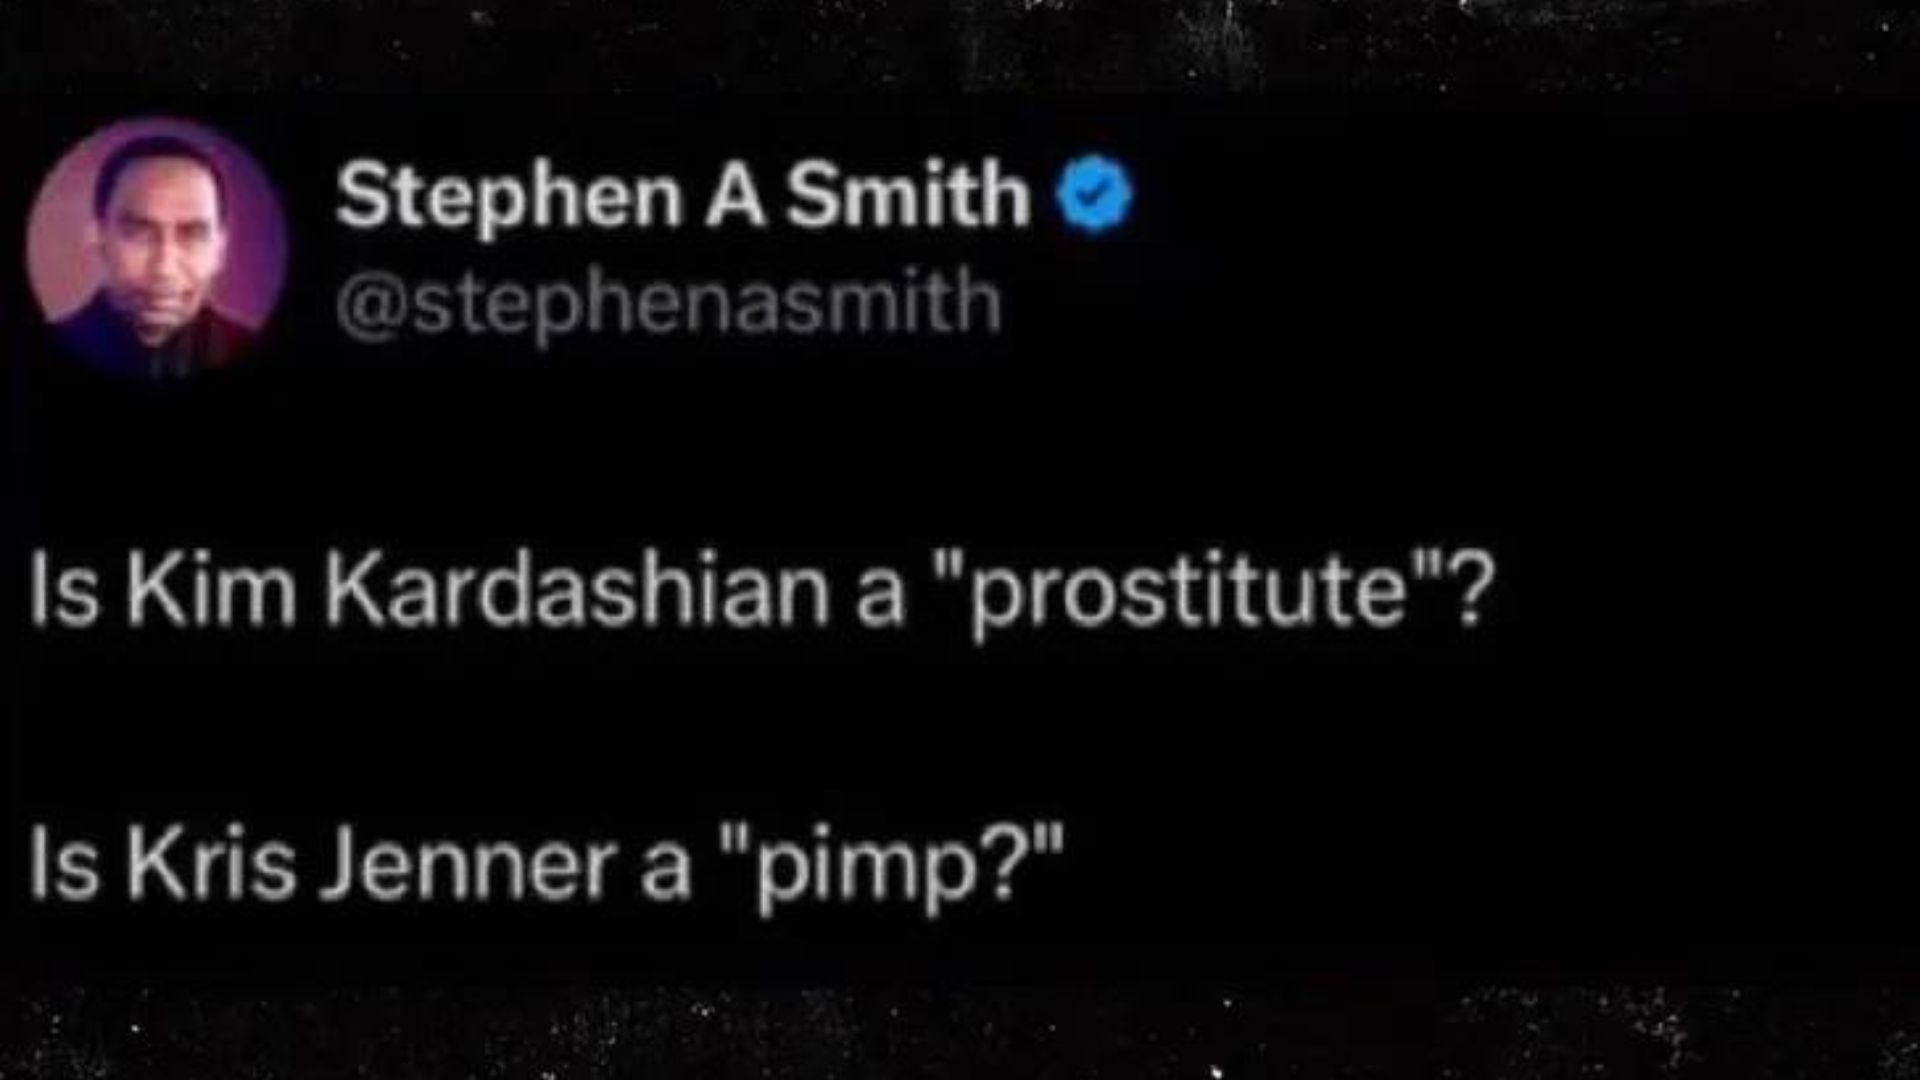 Stephen A Smith Backtracks on His Kim Kardashian 'Prost*tute' Comment After Patrick  Beverley Call-Out: “Clerical Error Bro!” - The SportsRush